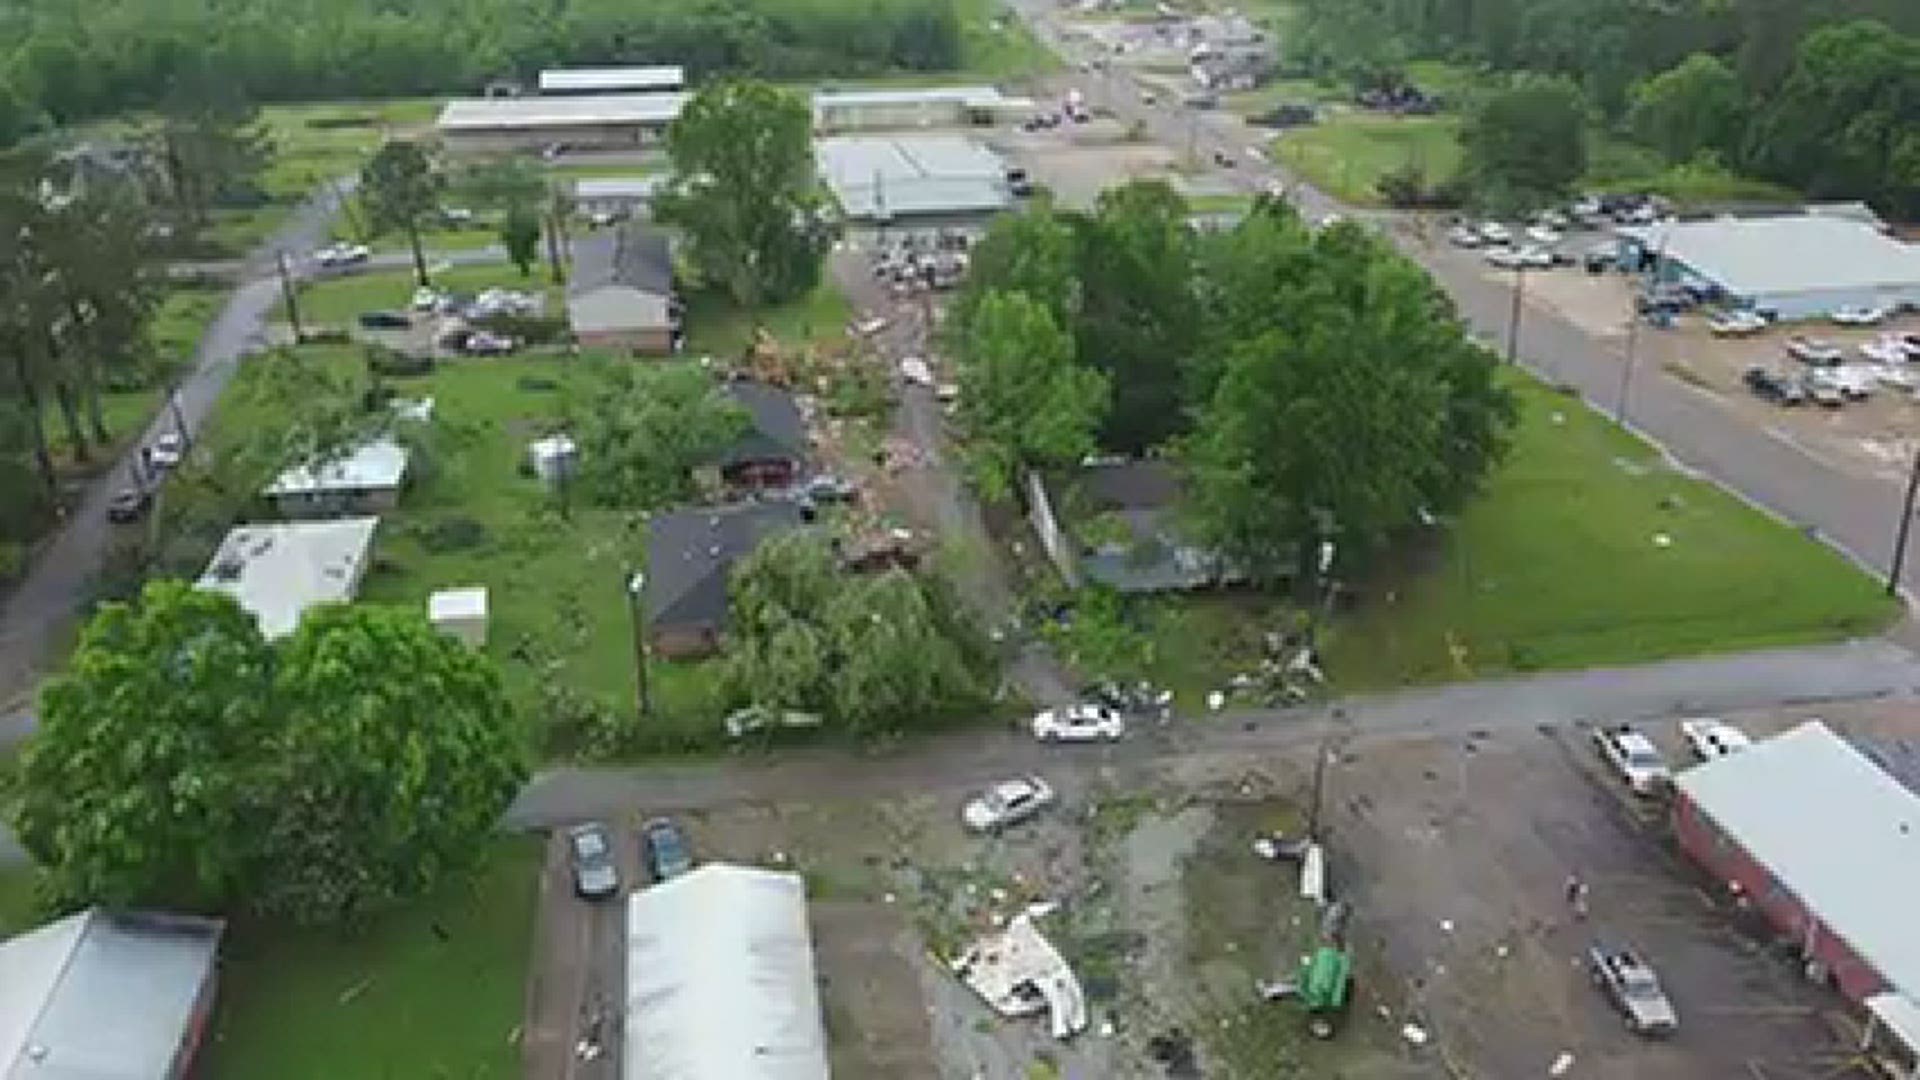 This is drone video from the Calhoun County, Mississippi, Sheriff's Office of tornado damage in that area.